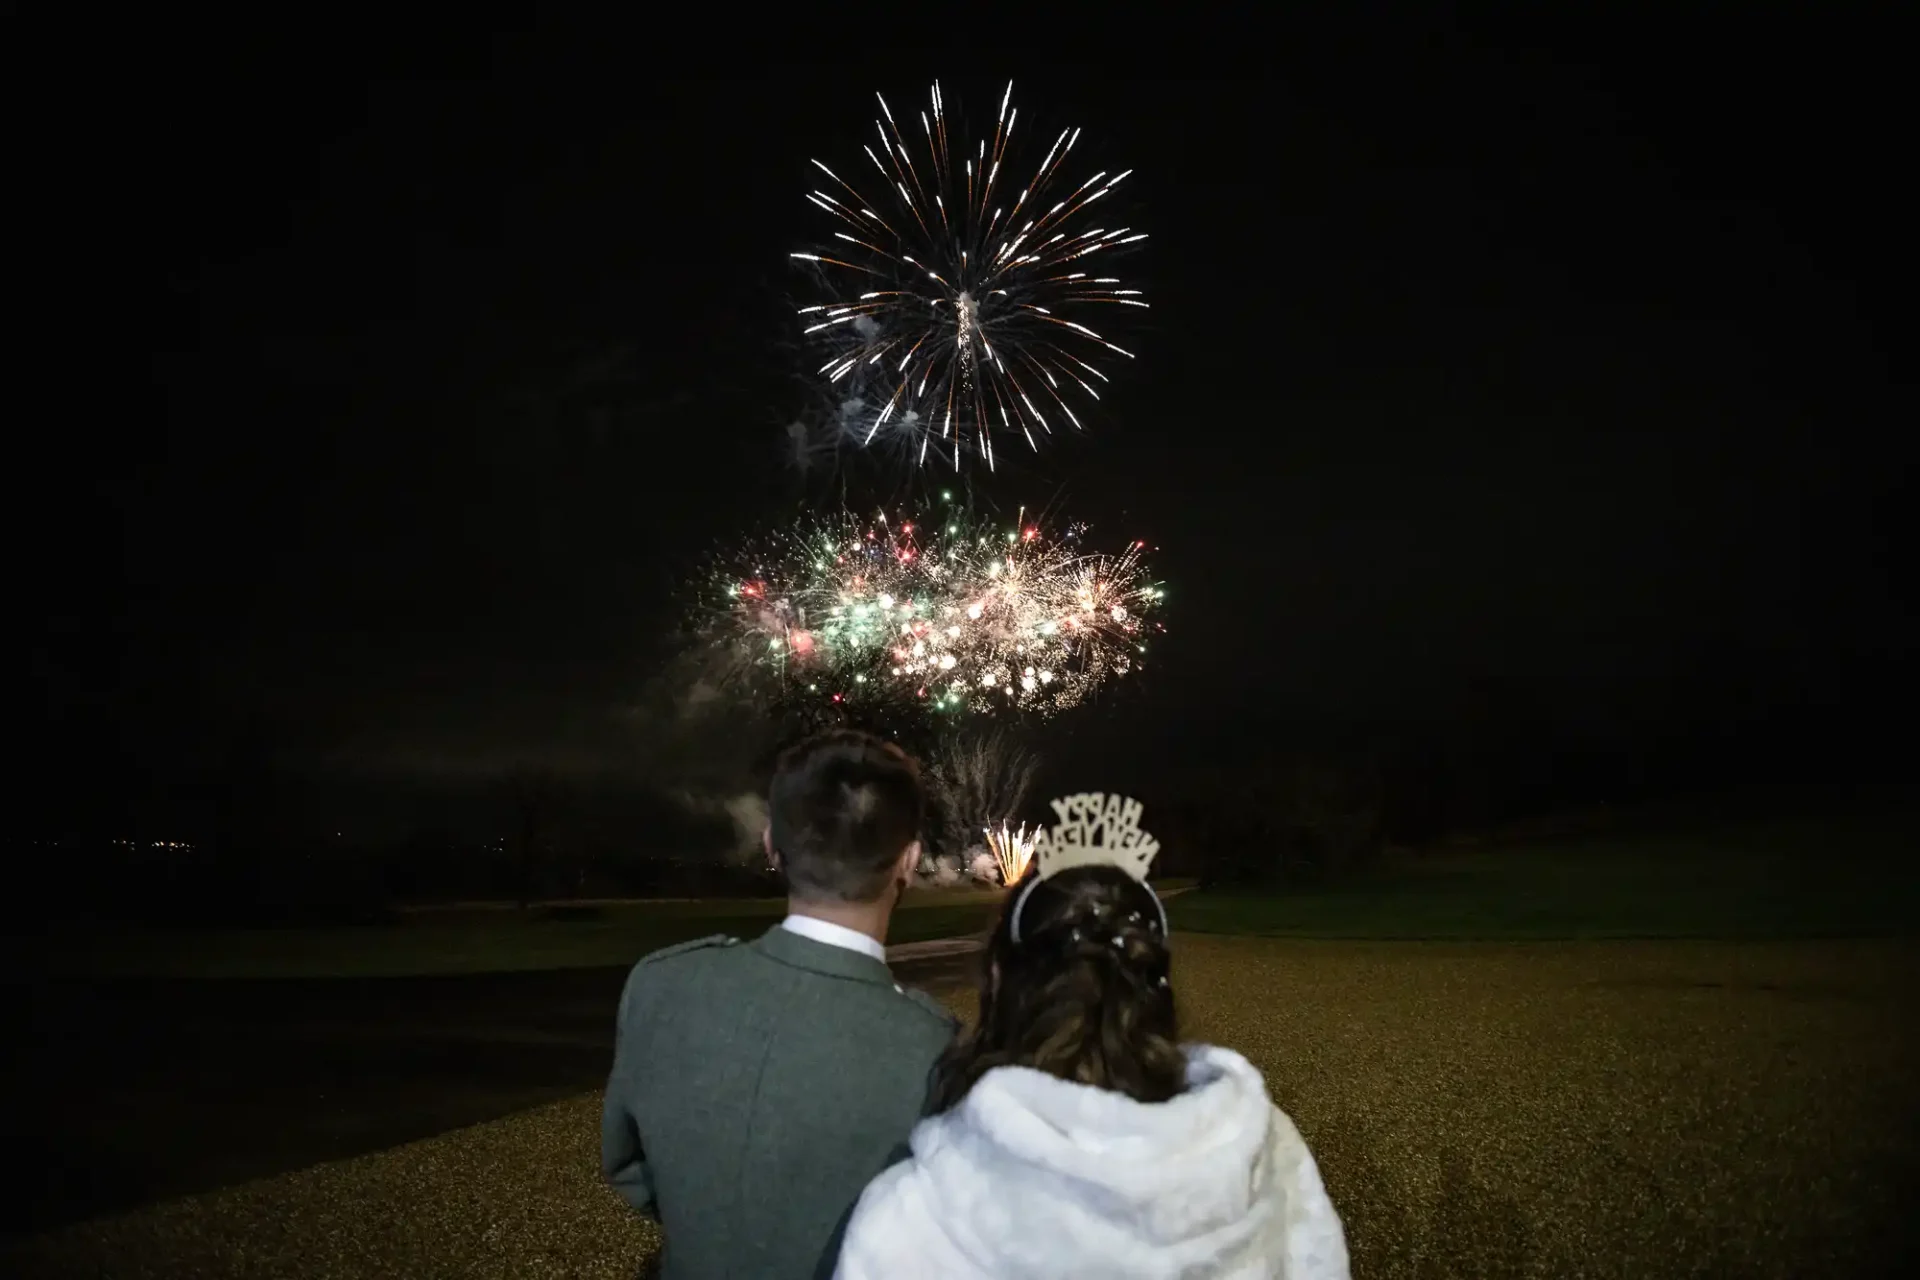 A couple stands facing a nighttime sky filled with fireworks. The woman is wearing a tiara.